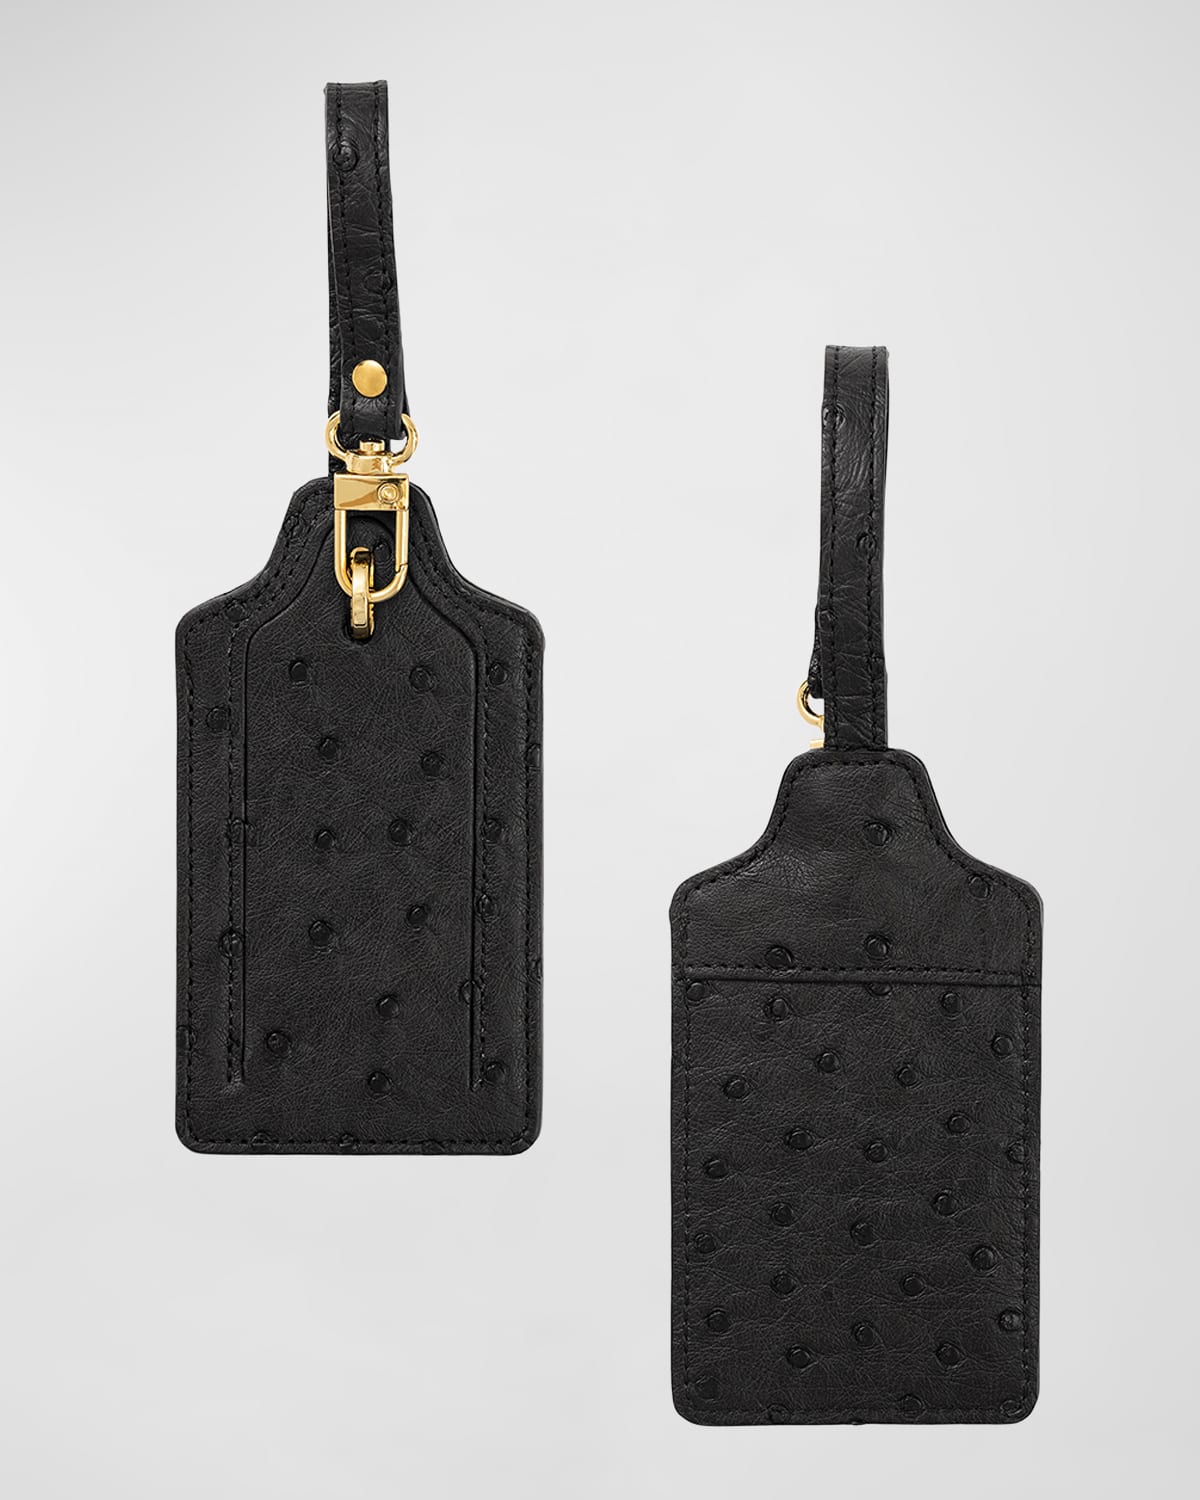 Abas Ostrich Leather Luggage Tag, Set of 2 Black